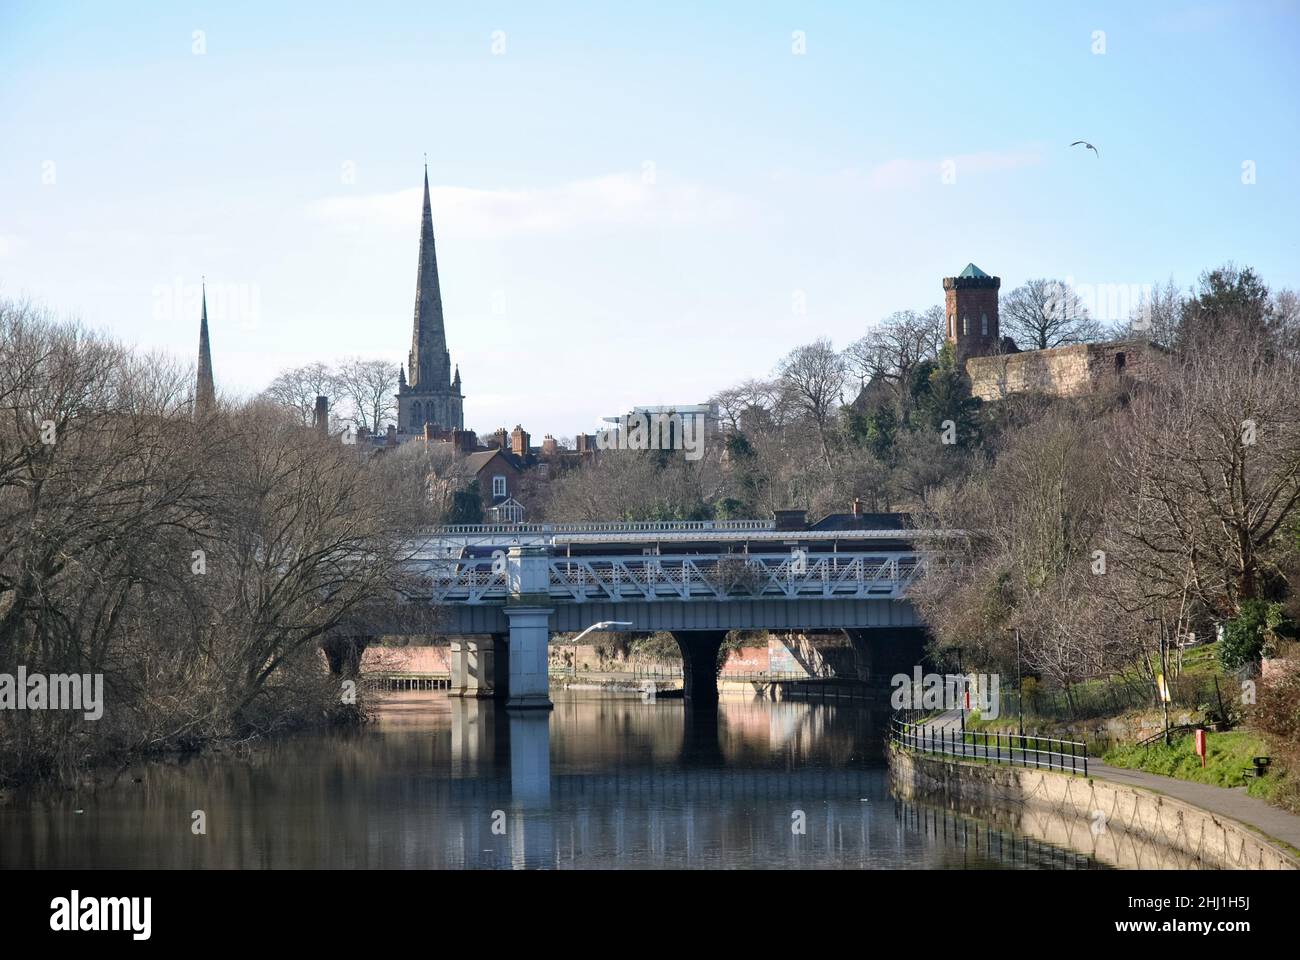 A town scape image of Shrewsbury showing the river,  railway bridge of the station, Laura's Tower and the twin spires in the background Stock Photo